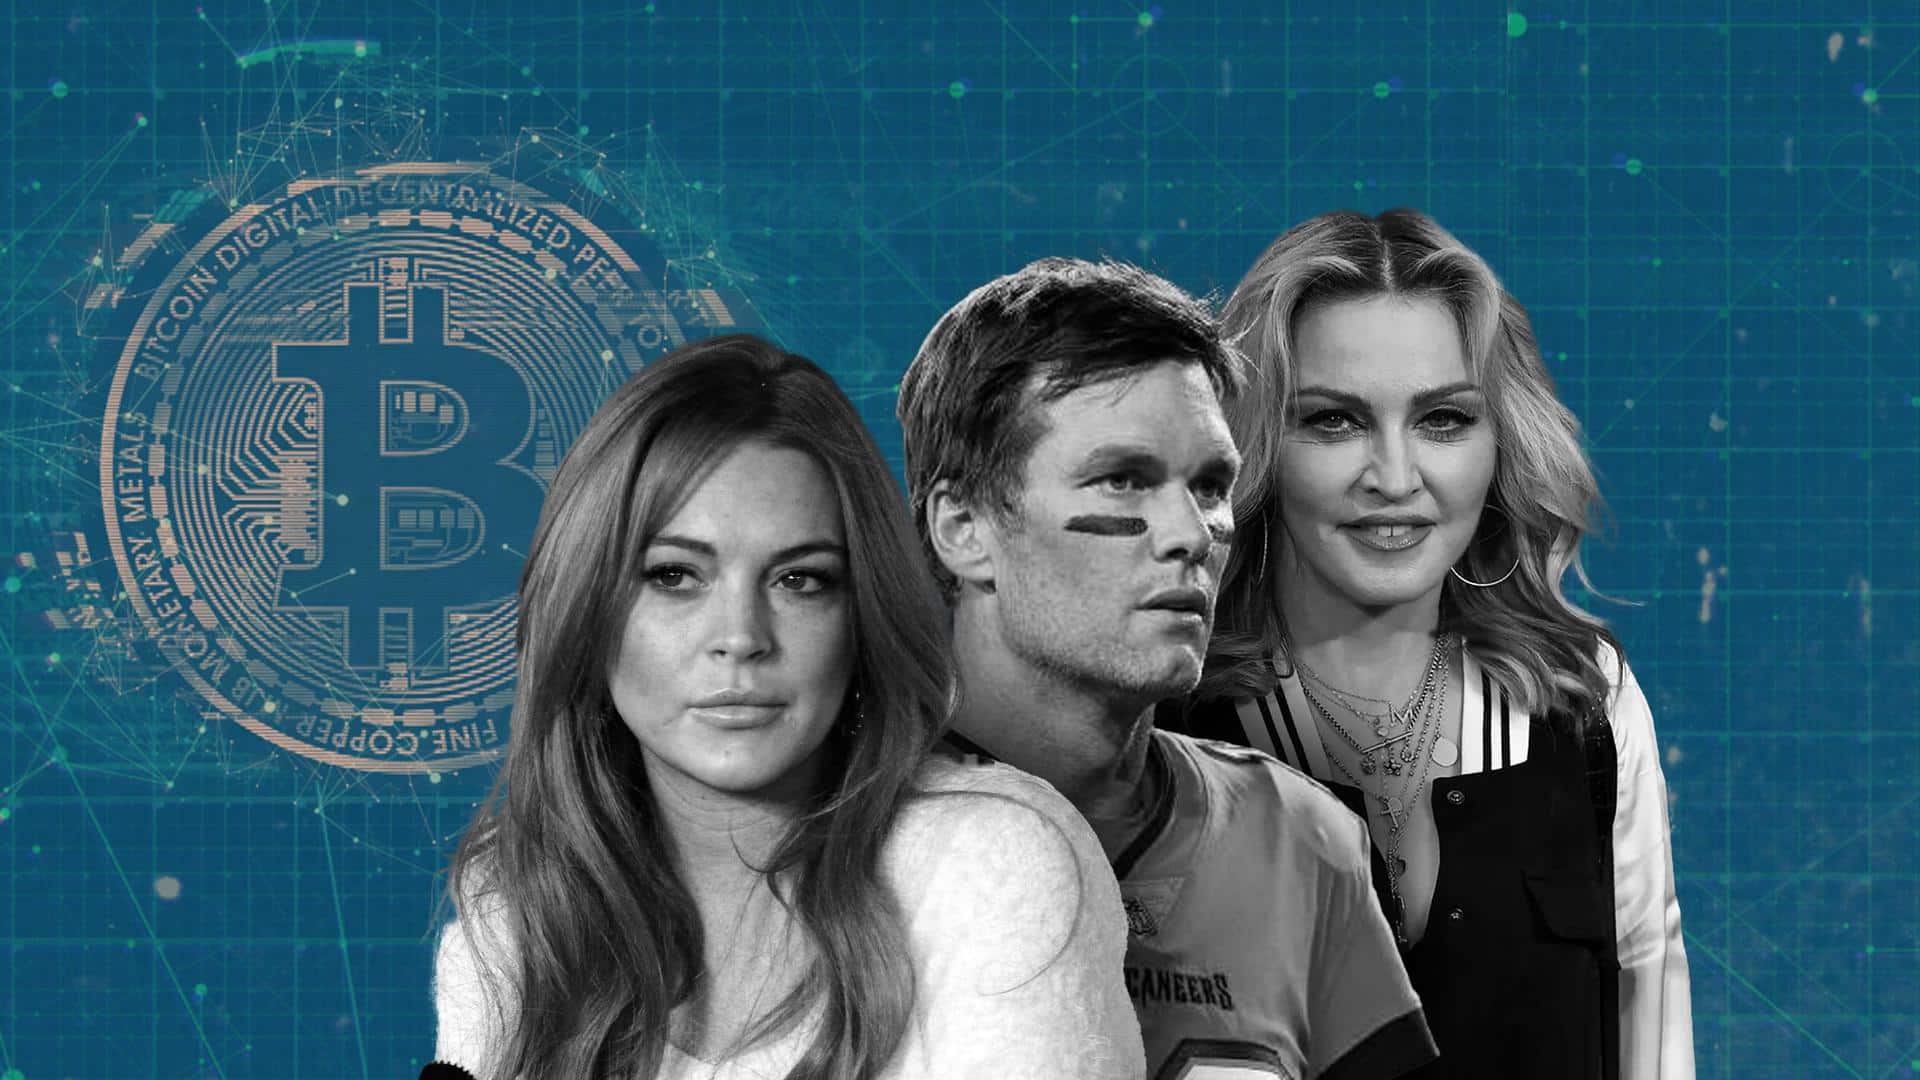 These celebs invested in cryptos, and are now in trouble